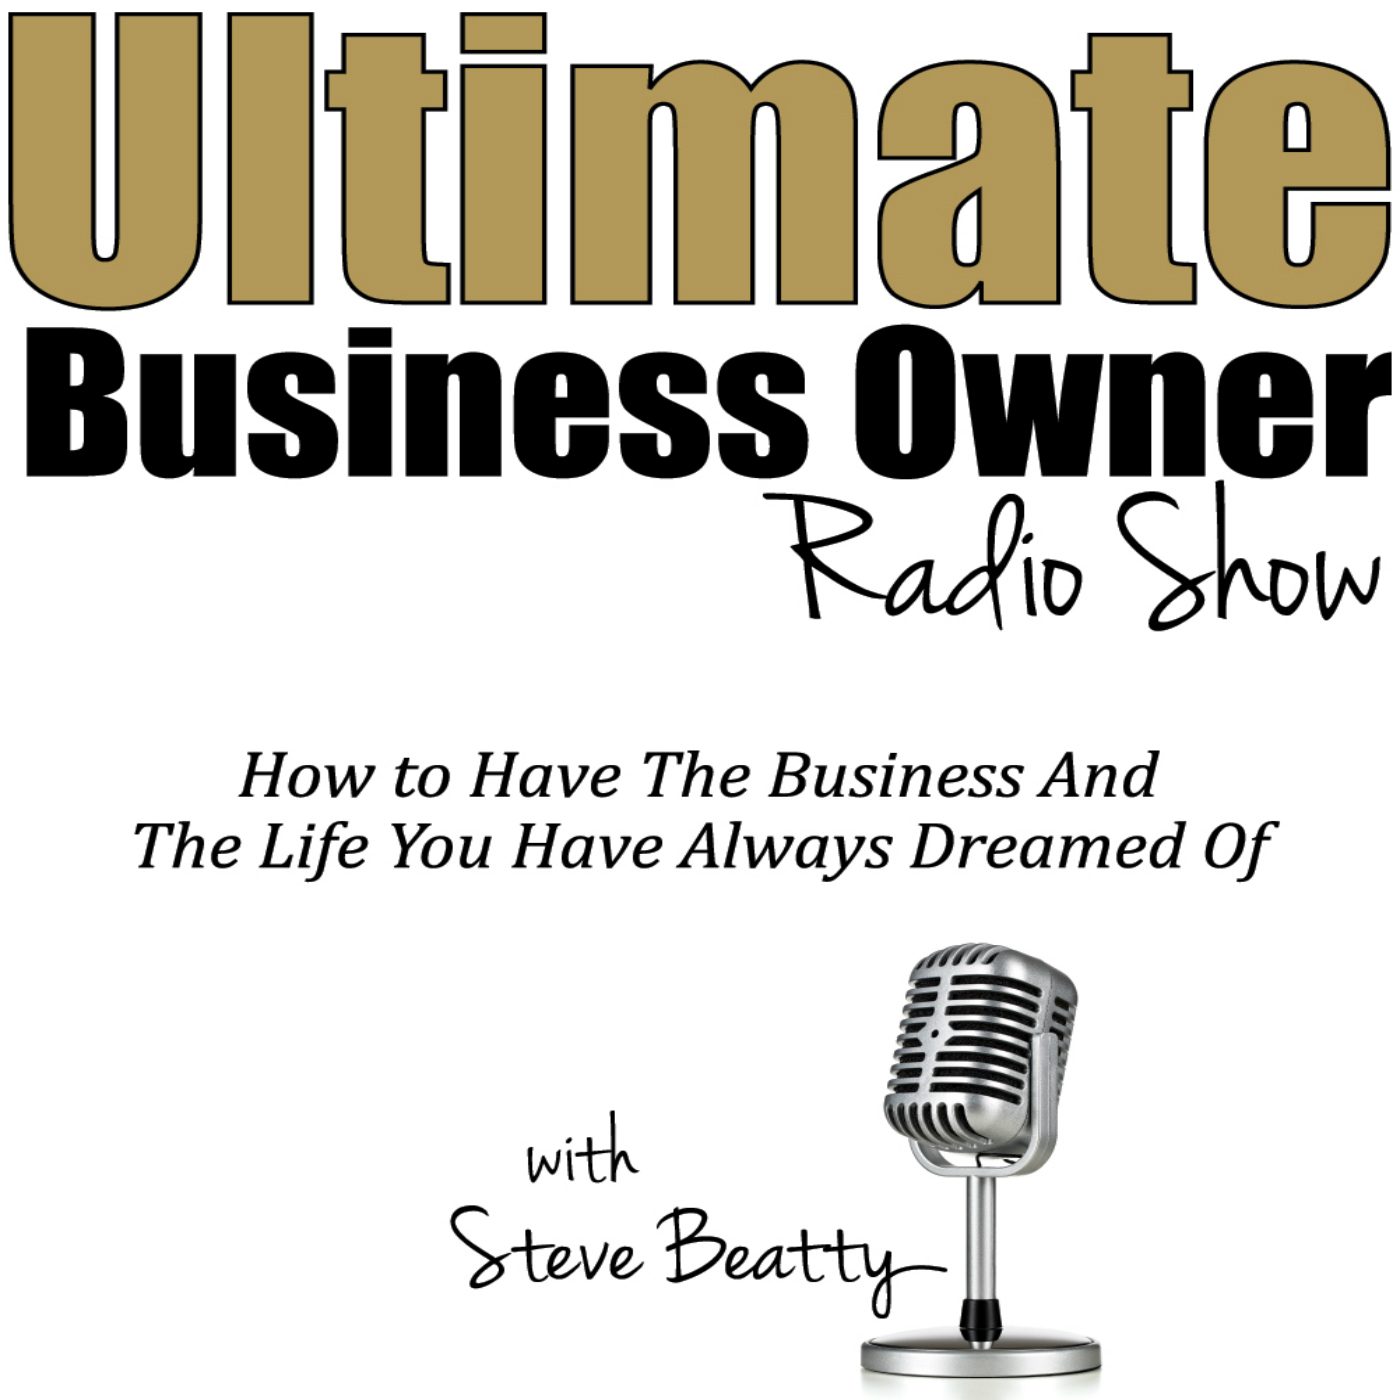 Ultimate Business Owner: Caesar Fonte (1 Minute Highlight)